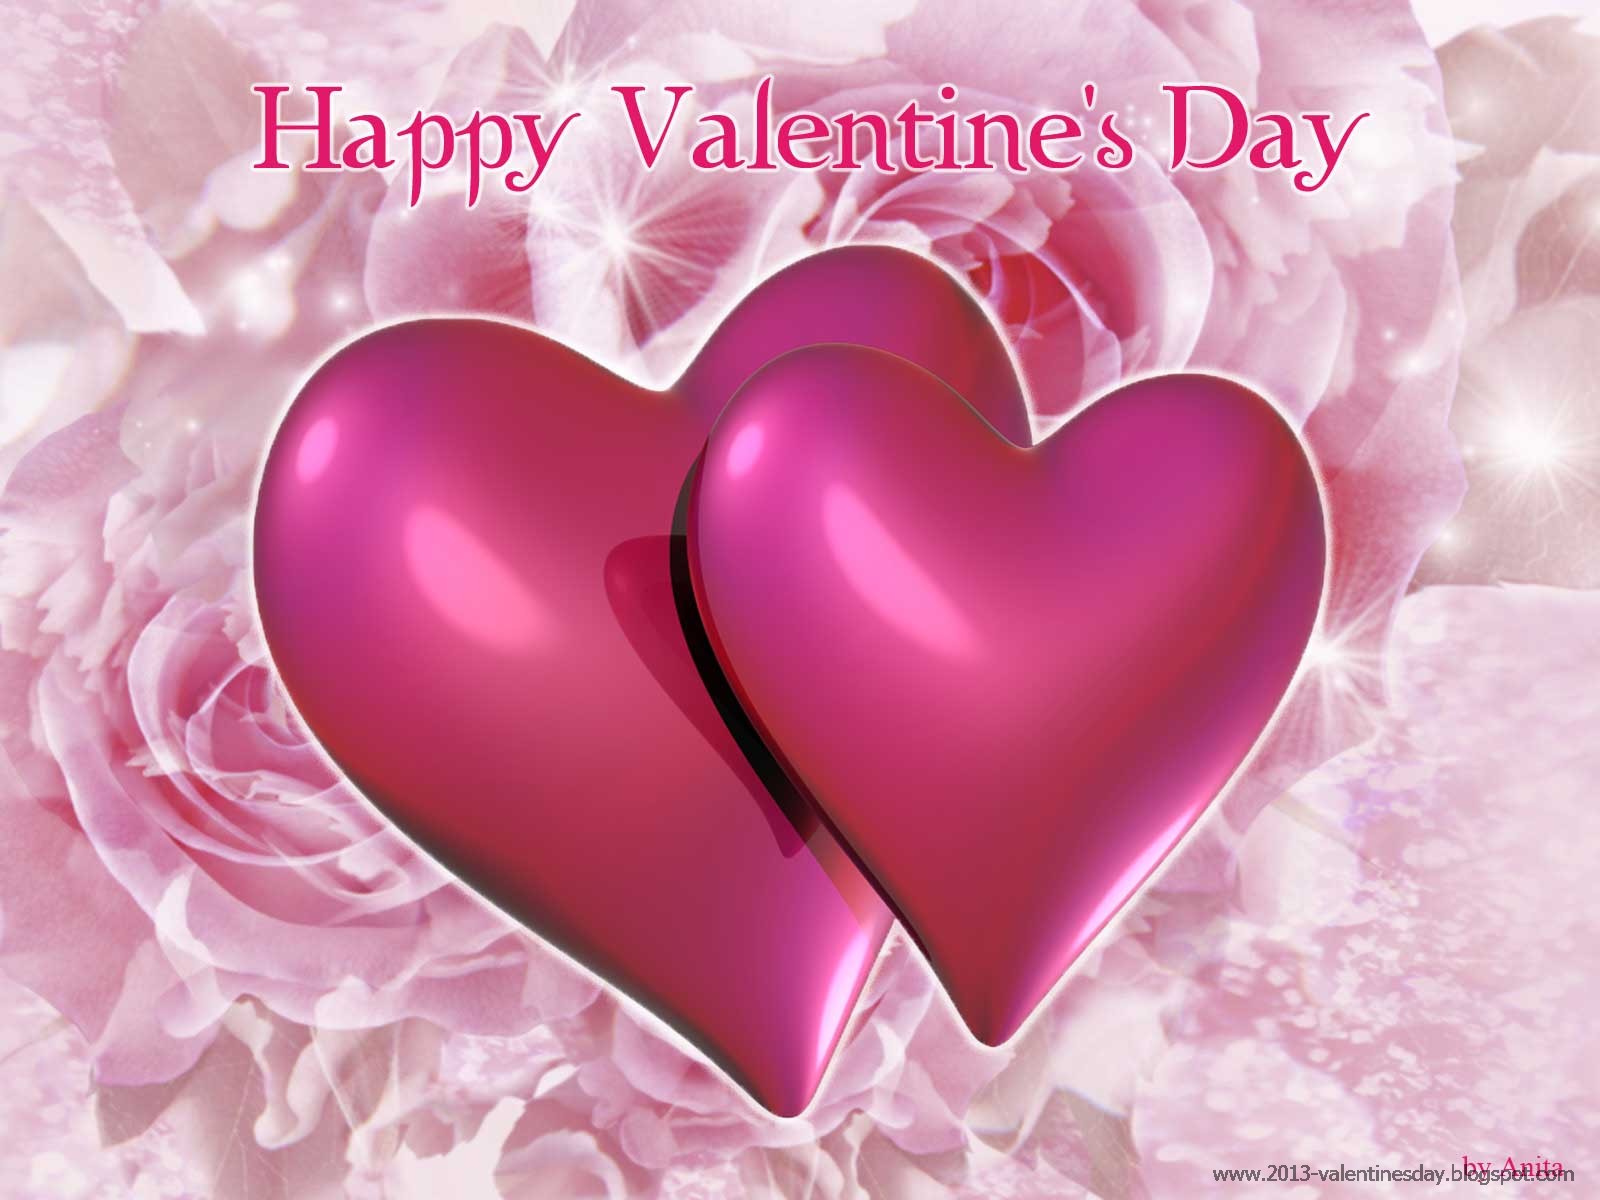 Happy Valentines day 2015 HD wallpapers (1024px 1920px) | Valentine's ...